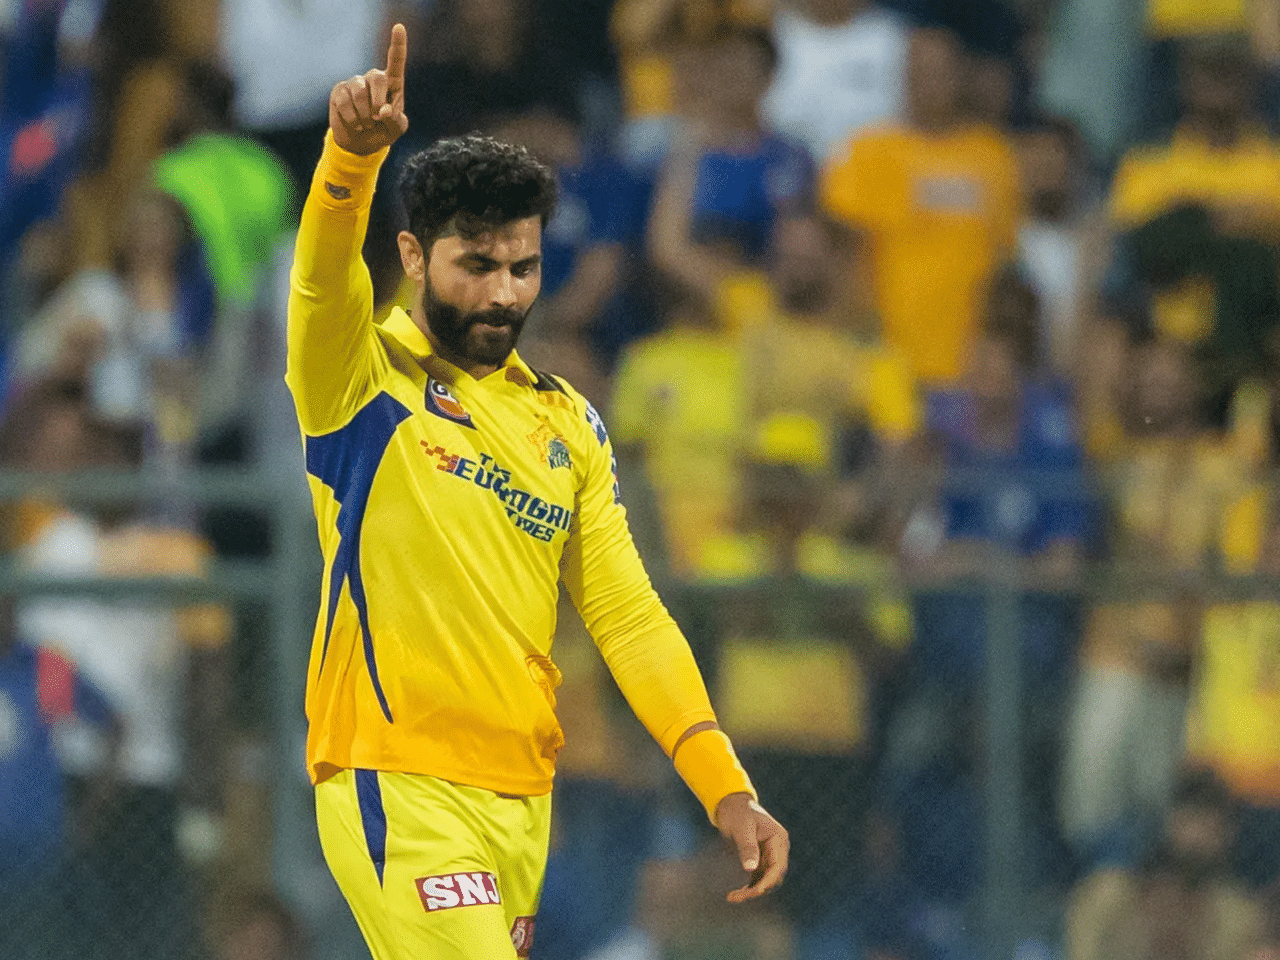 No seniority bias at CSK, even an youngster from U-19 gets the same respect: Ravindra Jadeja